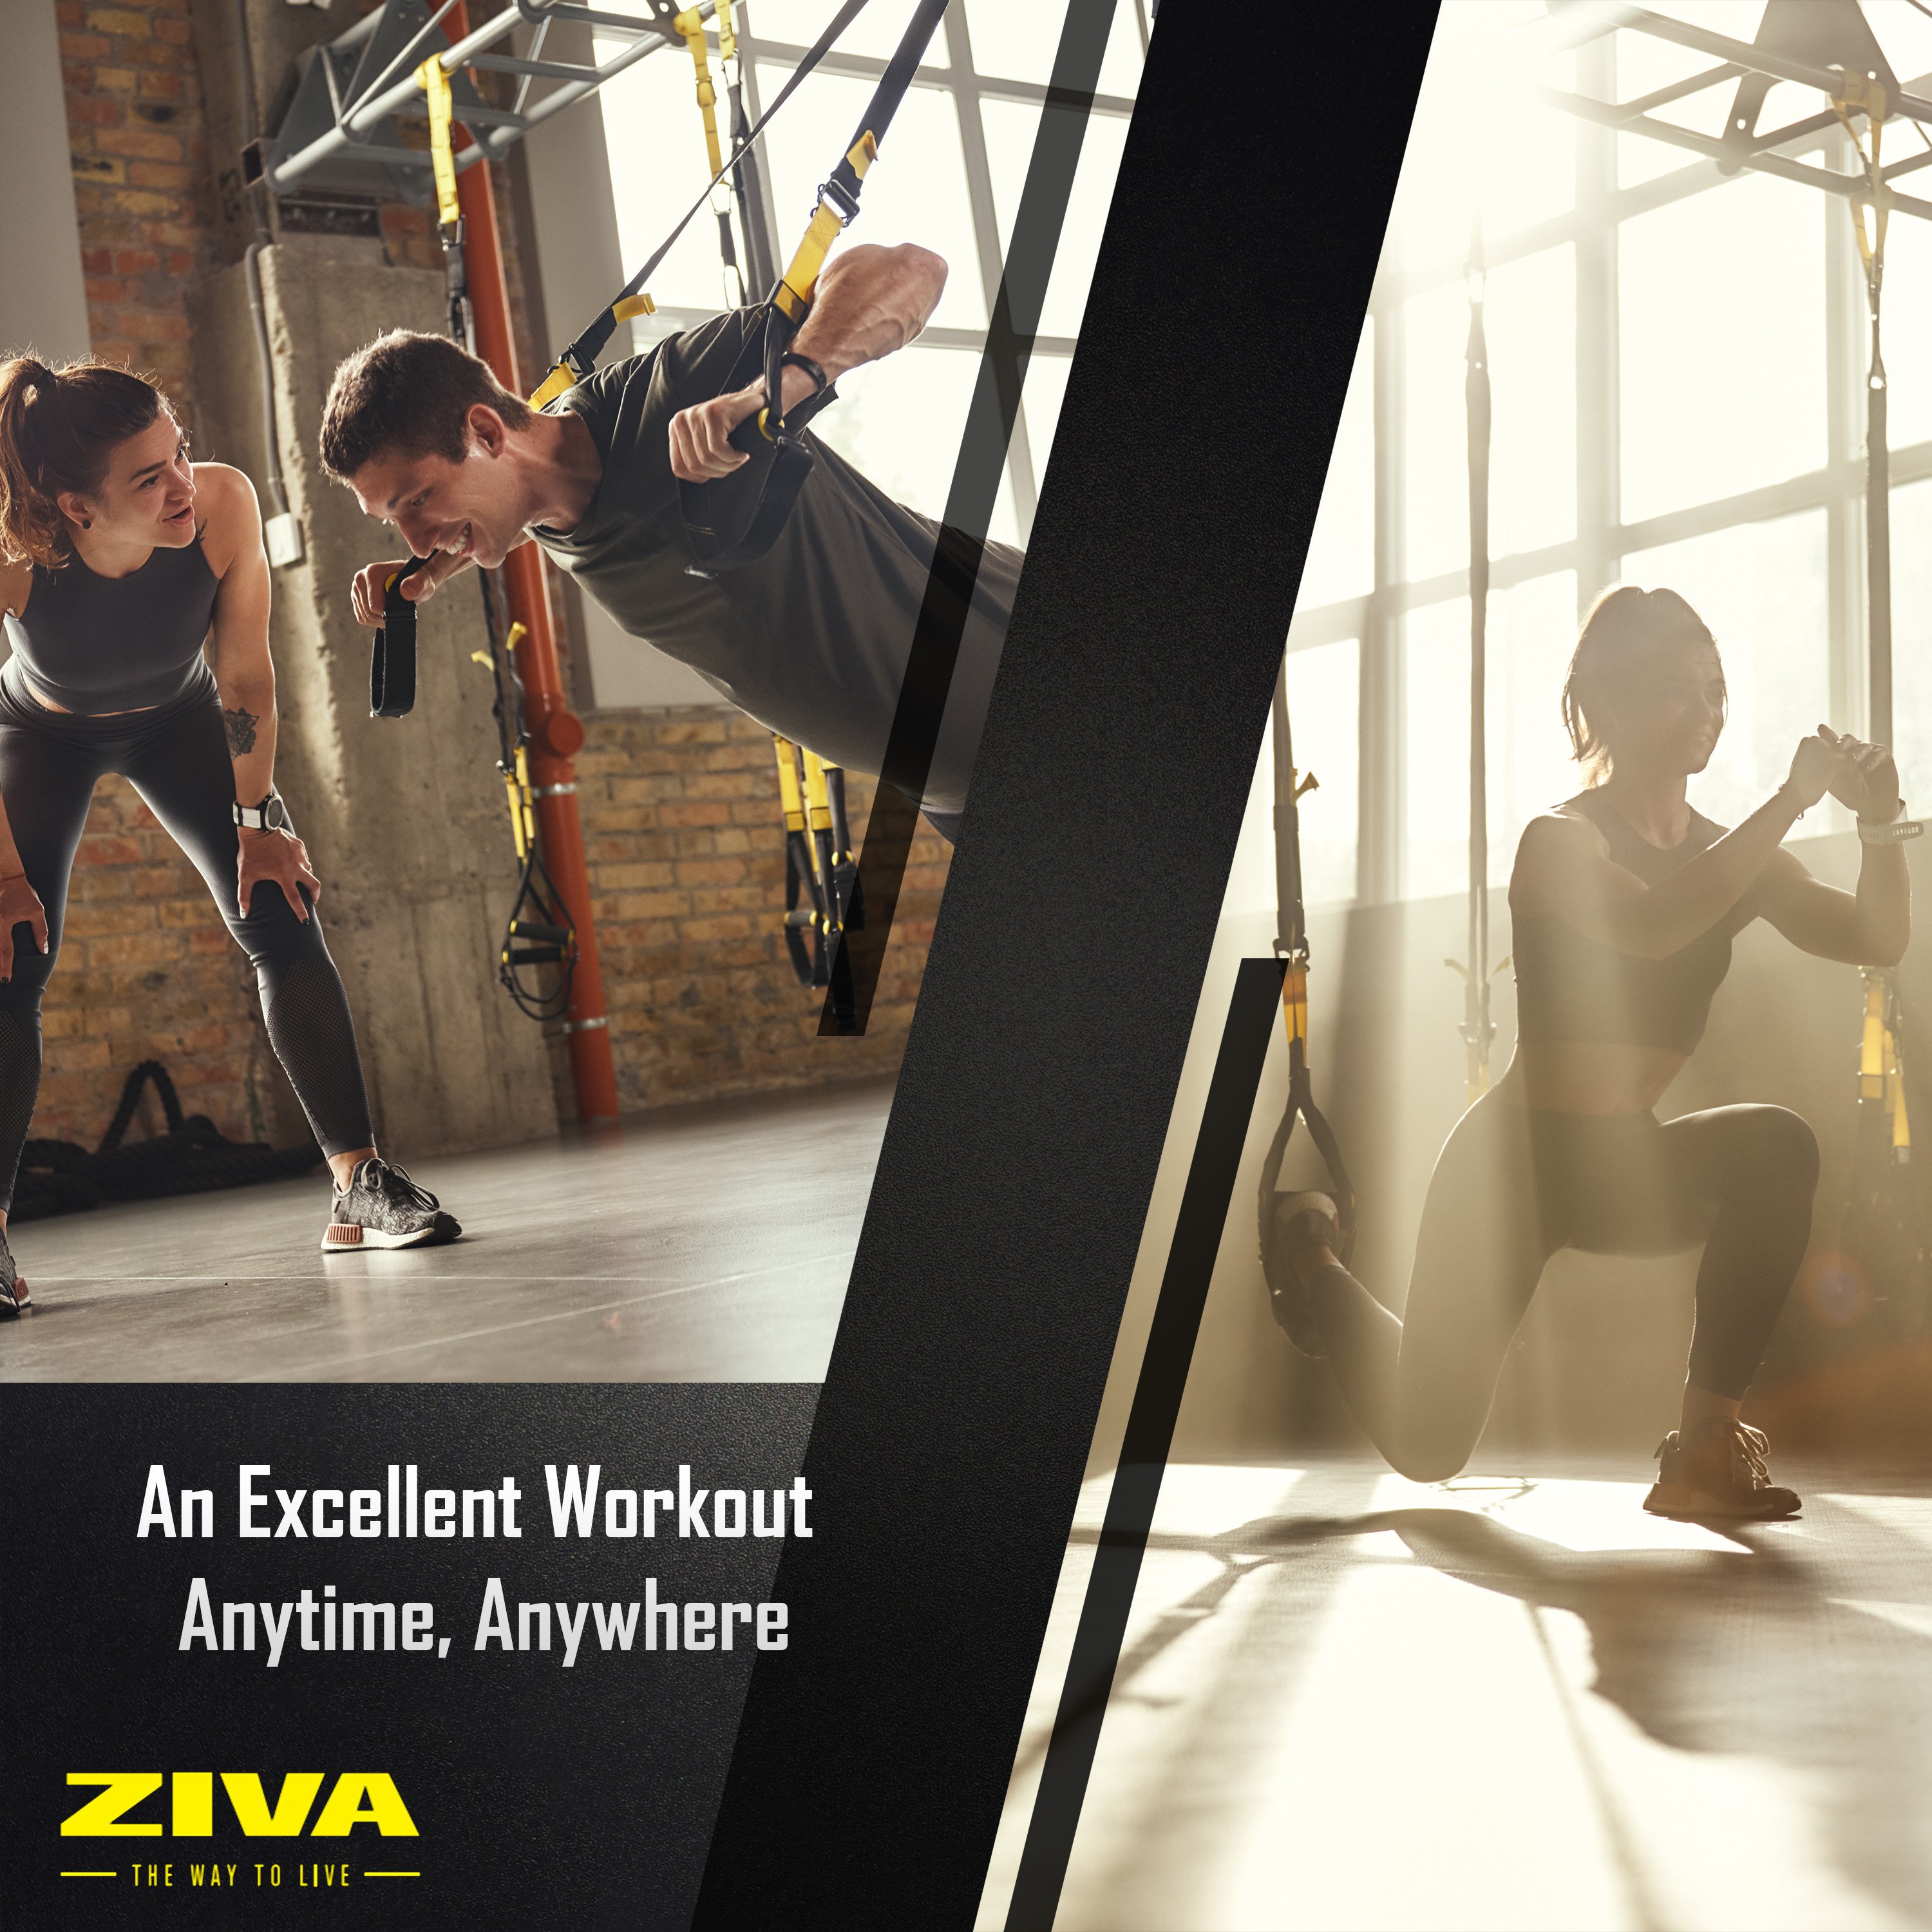 An excellent workout anytime, anywhere.